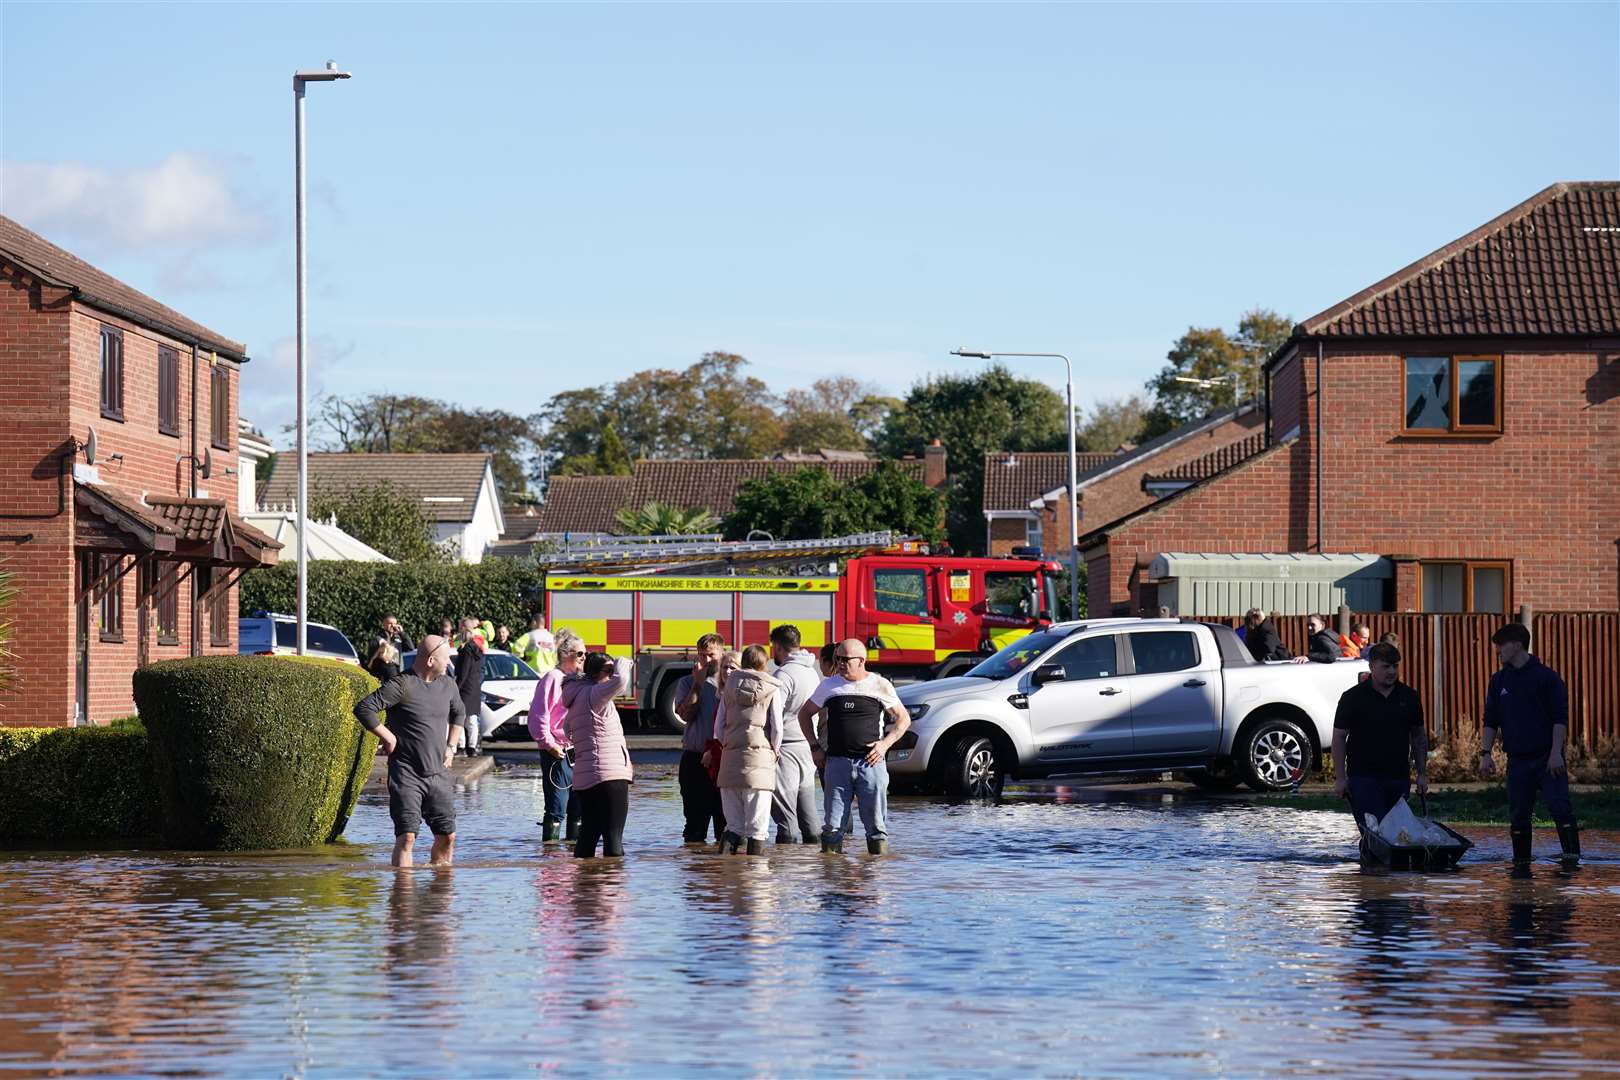 Flooding in Retford, seen here on Sunday, has caused damage to homes (Joe Giddens/PA)